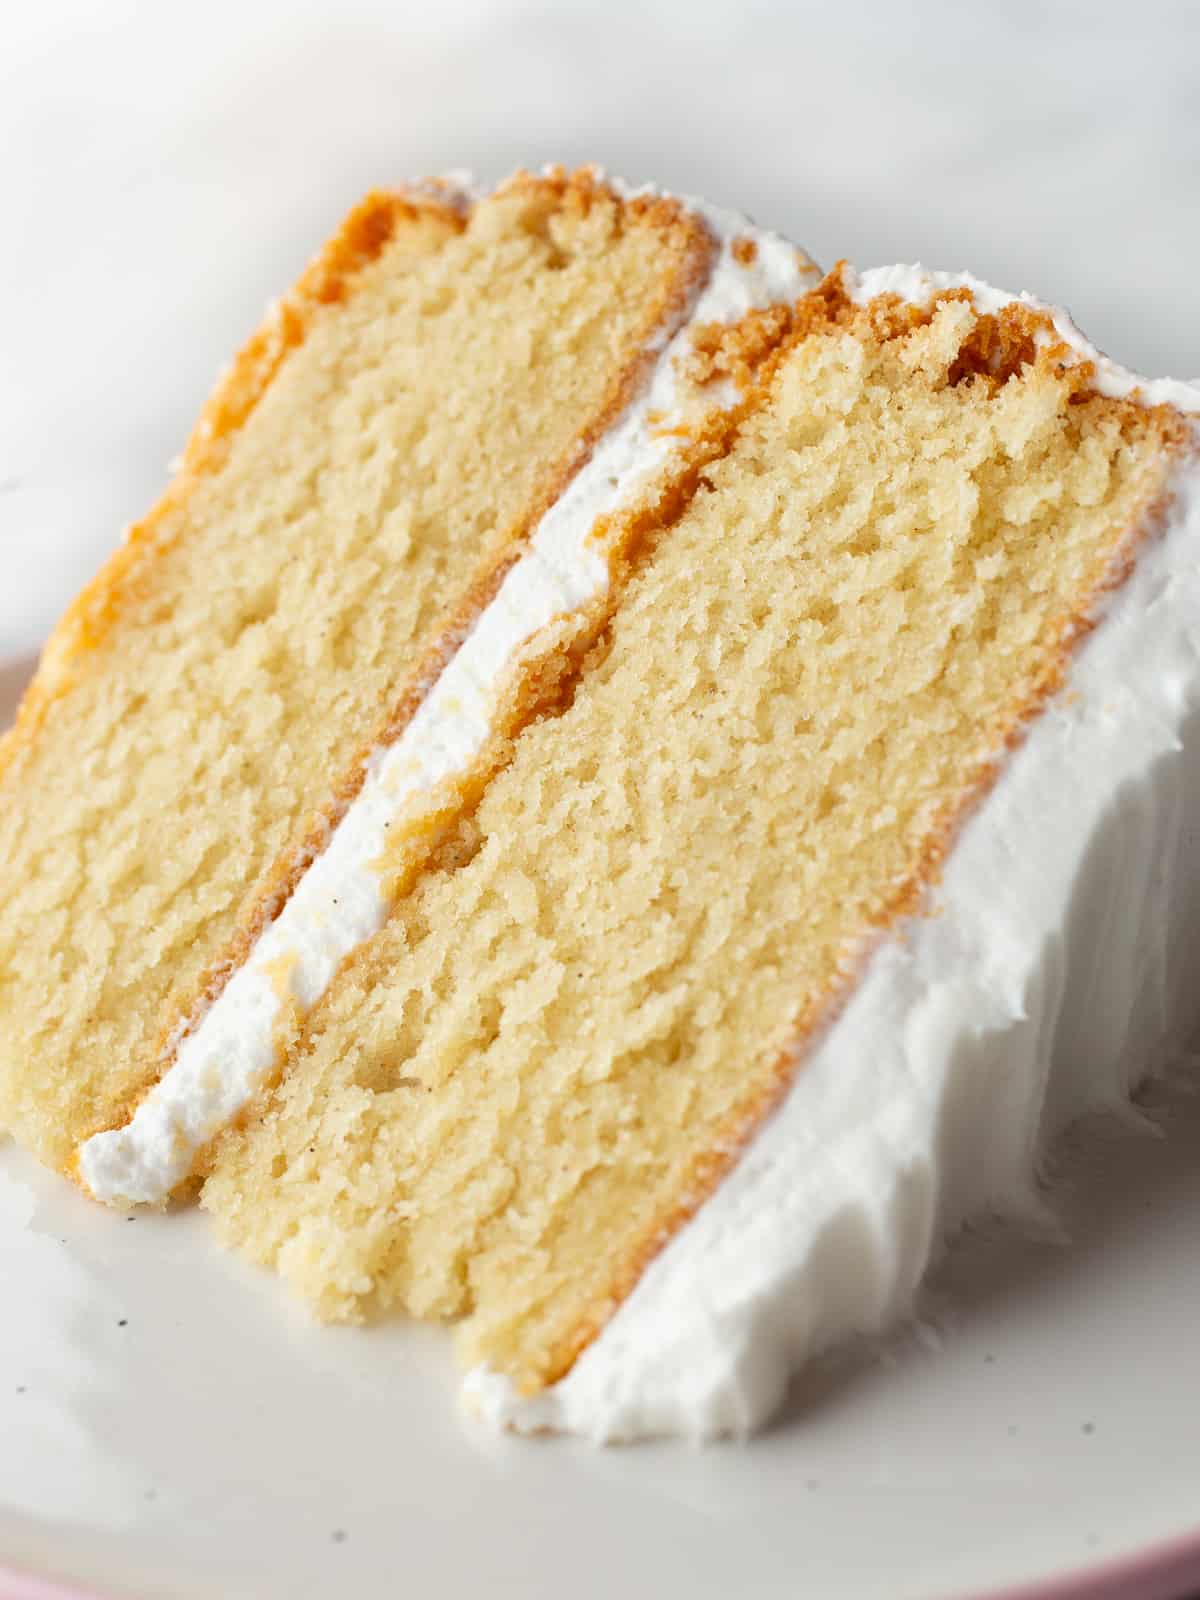 Gluten-free vanilla cake on a plate. The cake is frosted with vanilla buttercream.